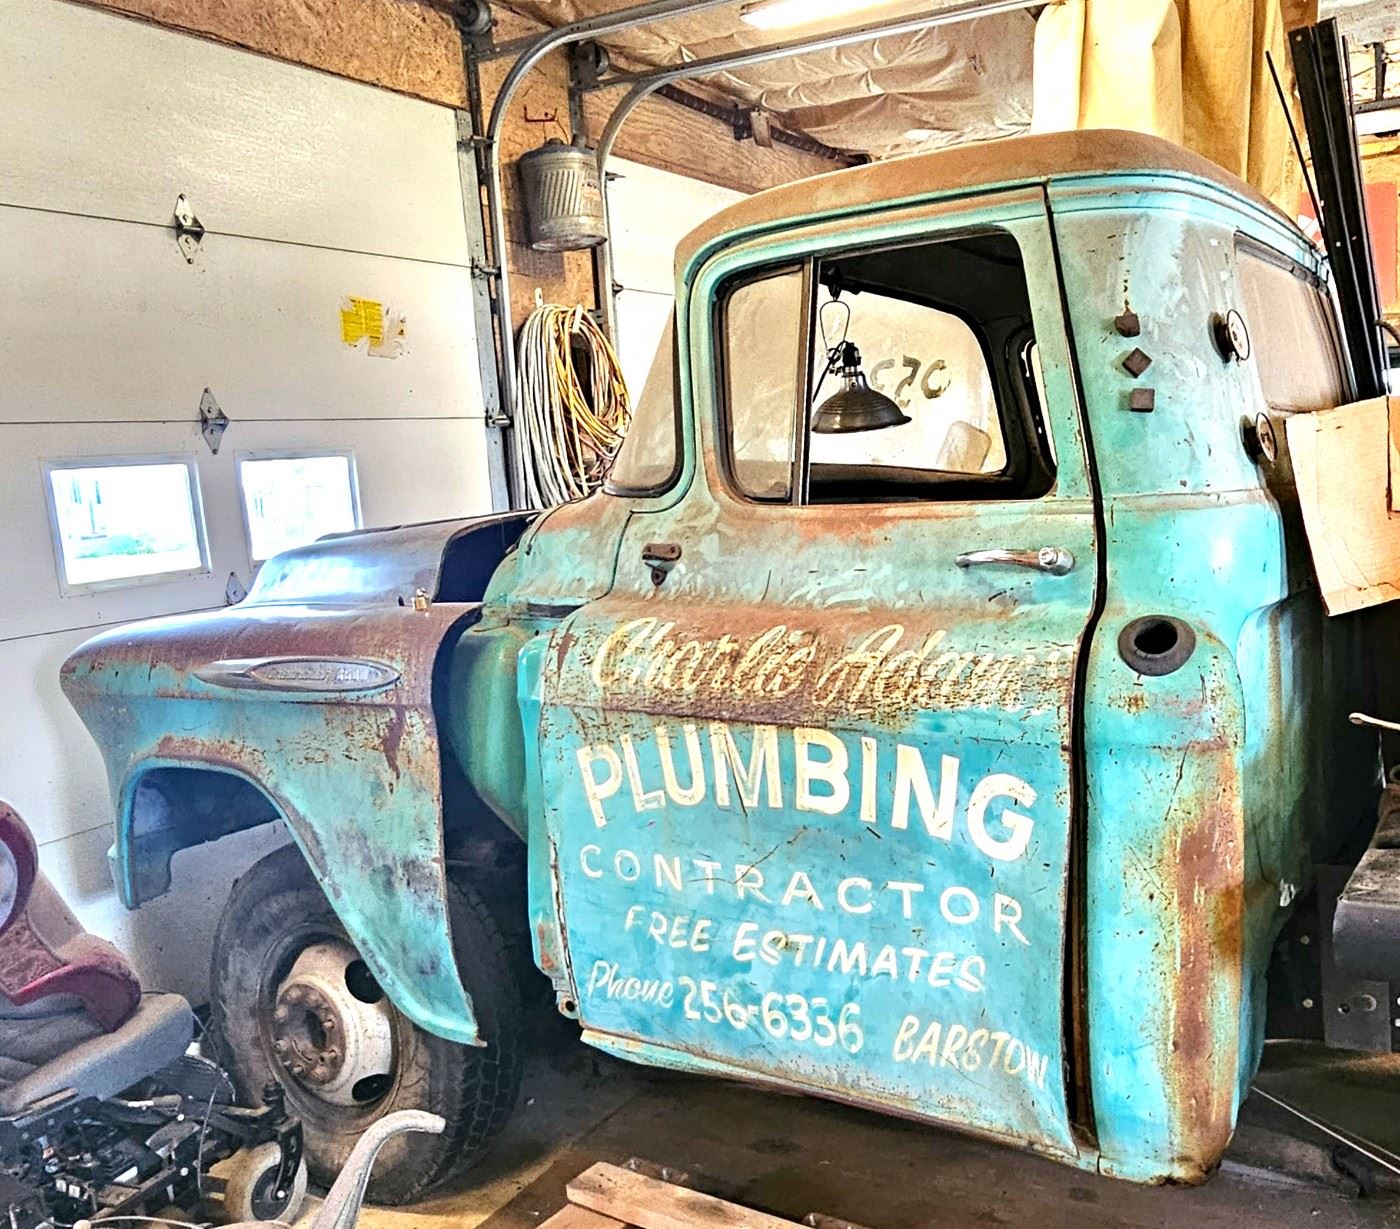 1 of 29 pictures - 1957 Chevy 3600 truck! Has original advertisement on both doors. This is most likely a part truck but the cab is in relatively good condition has a 454 motor with original transmission (titled & clear) 60762 miles. Lots of spare parts that will go with vehicle. Asking price is $5000.00 must sell by 11 am Sunday! Entertaining all offers! *** This is a pre-sale item! Contact Bill at 419-360-2636 for questions or to see the truck ***